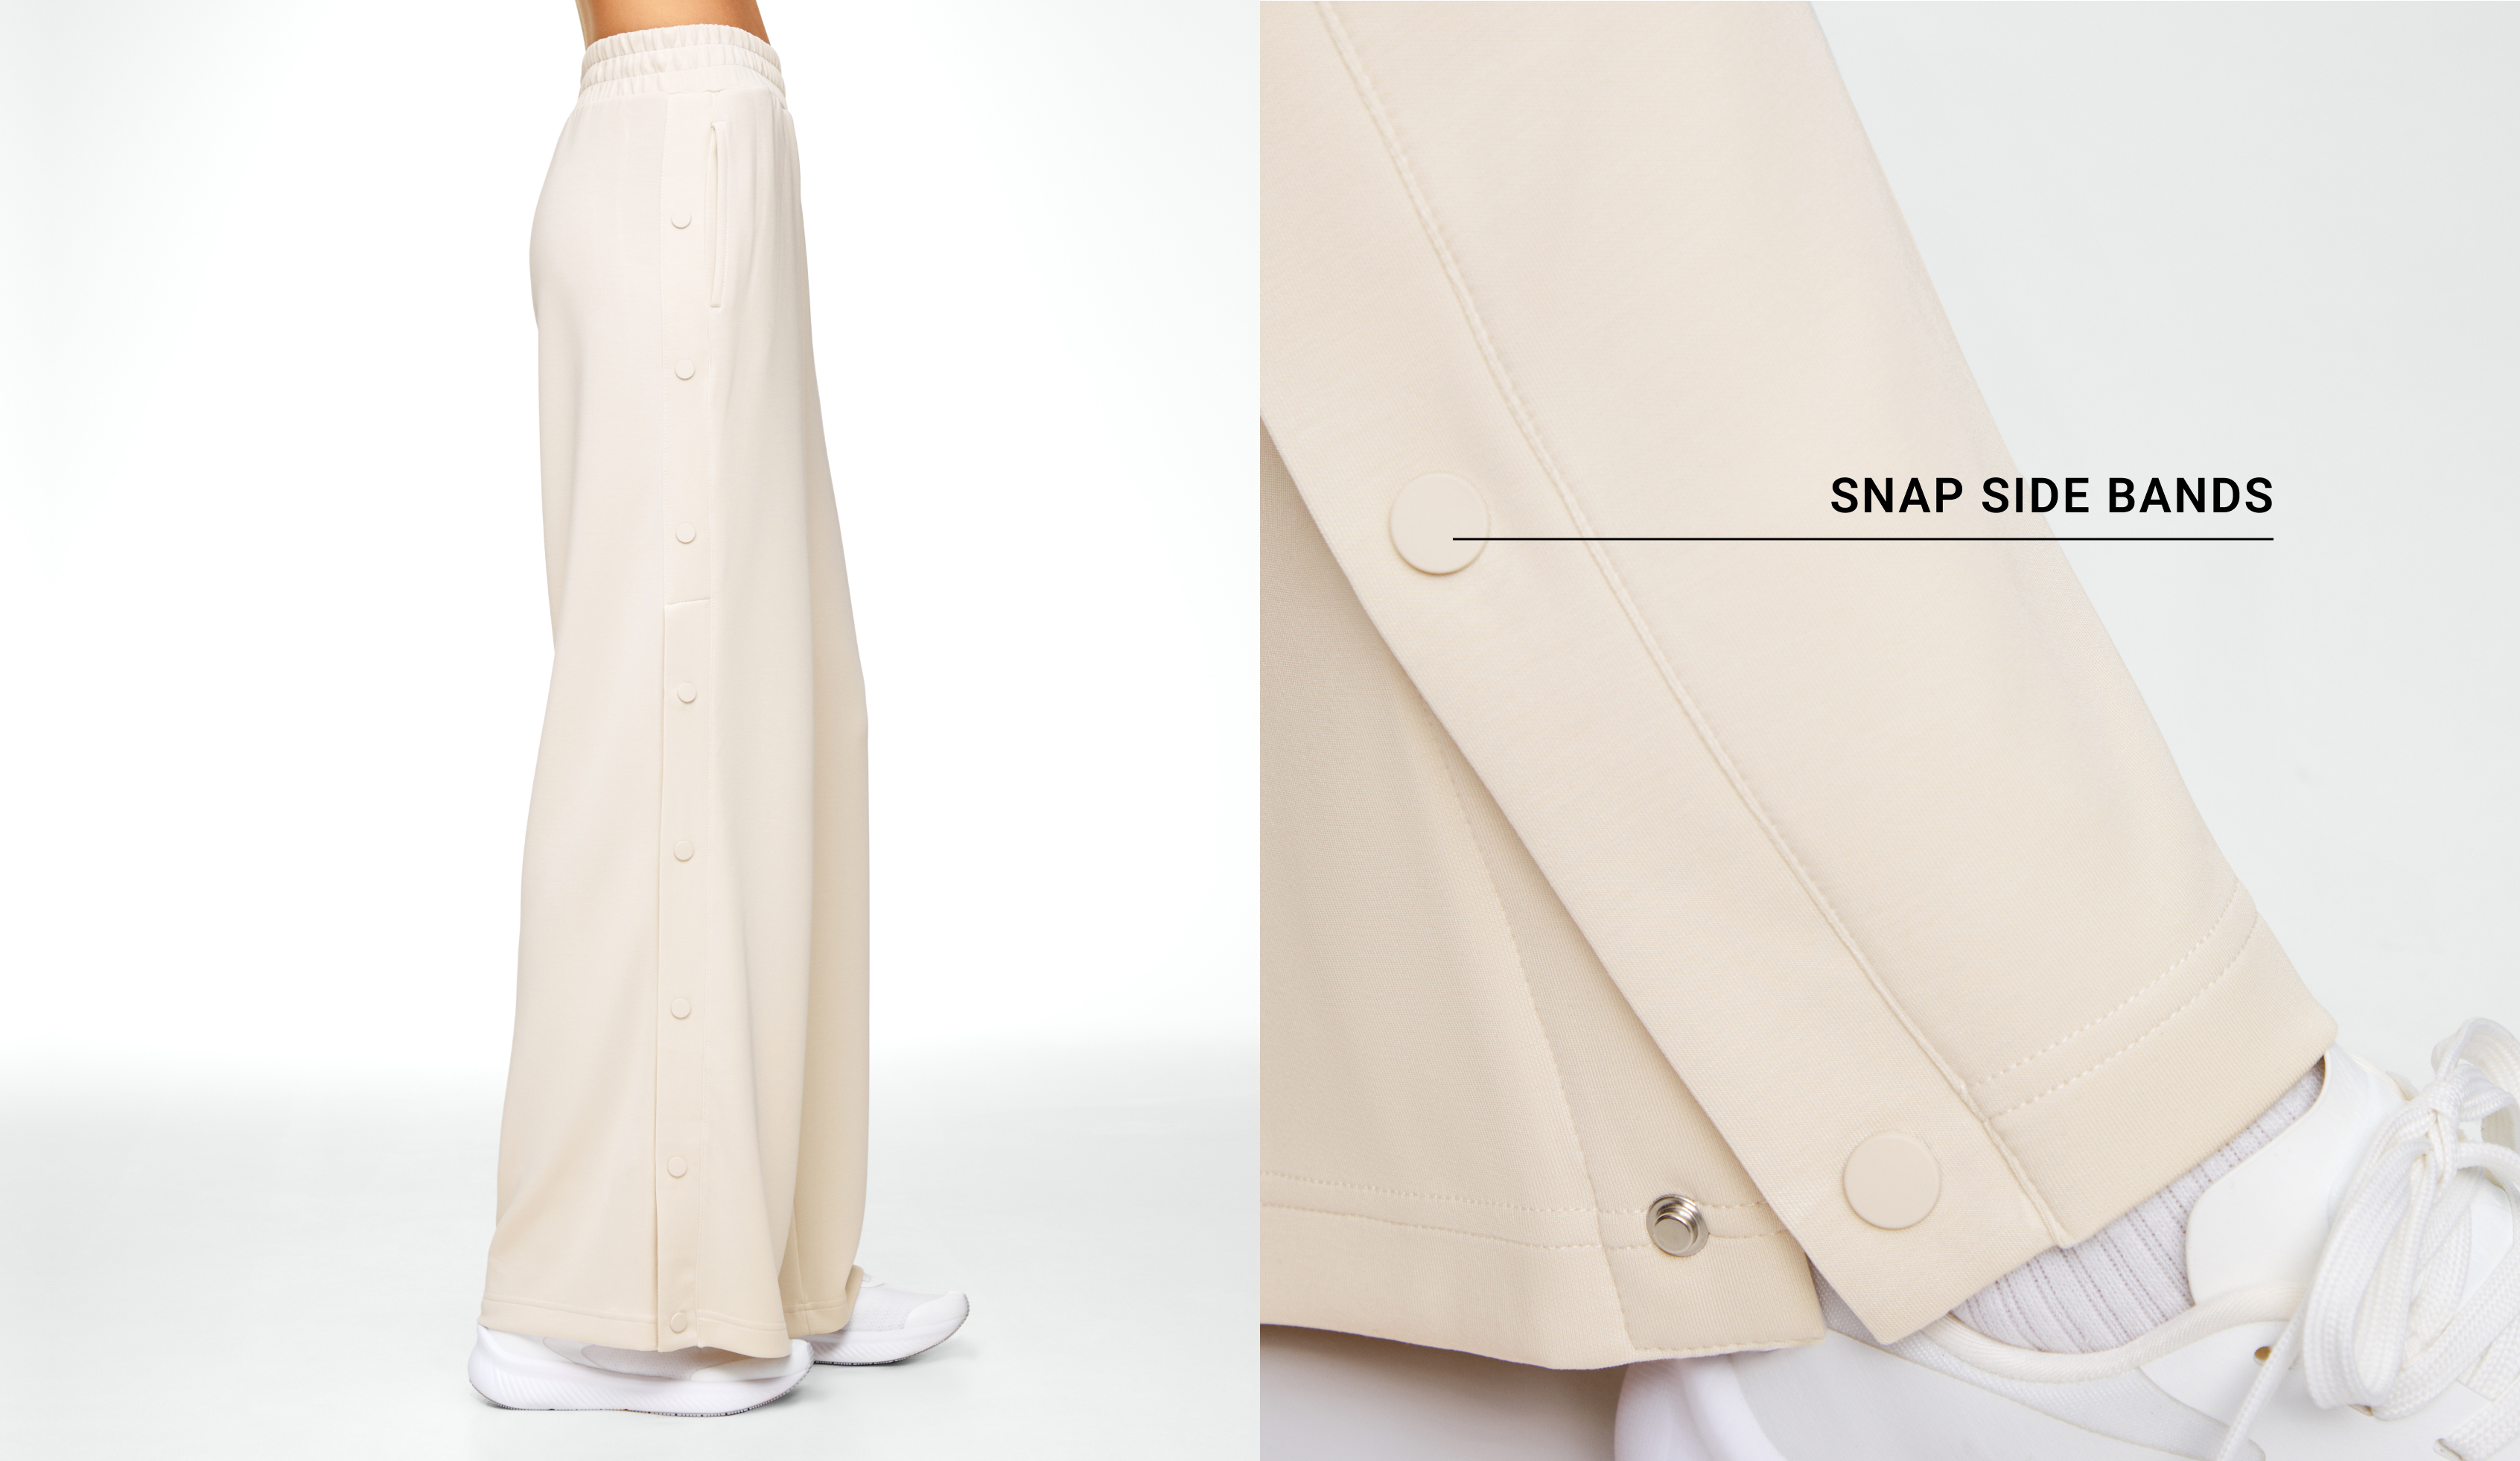 Soft touch modal wide-leg trousers with buttons